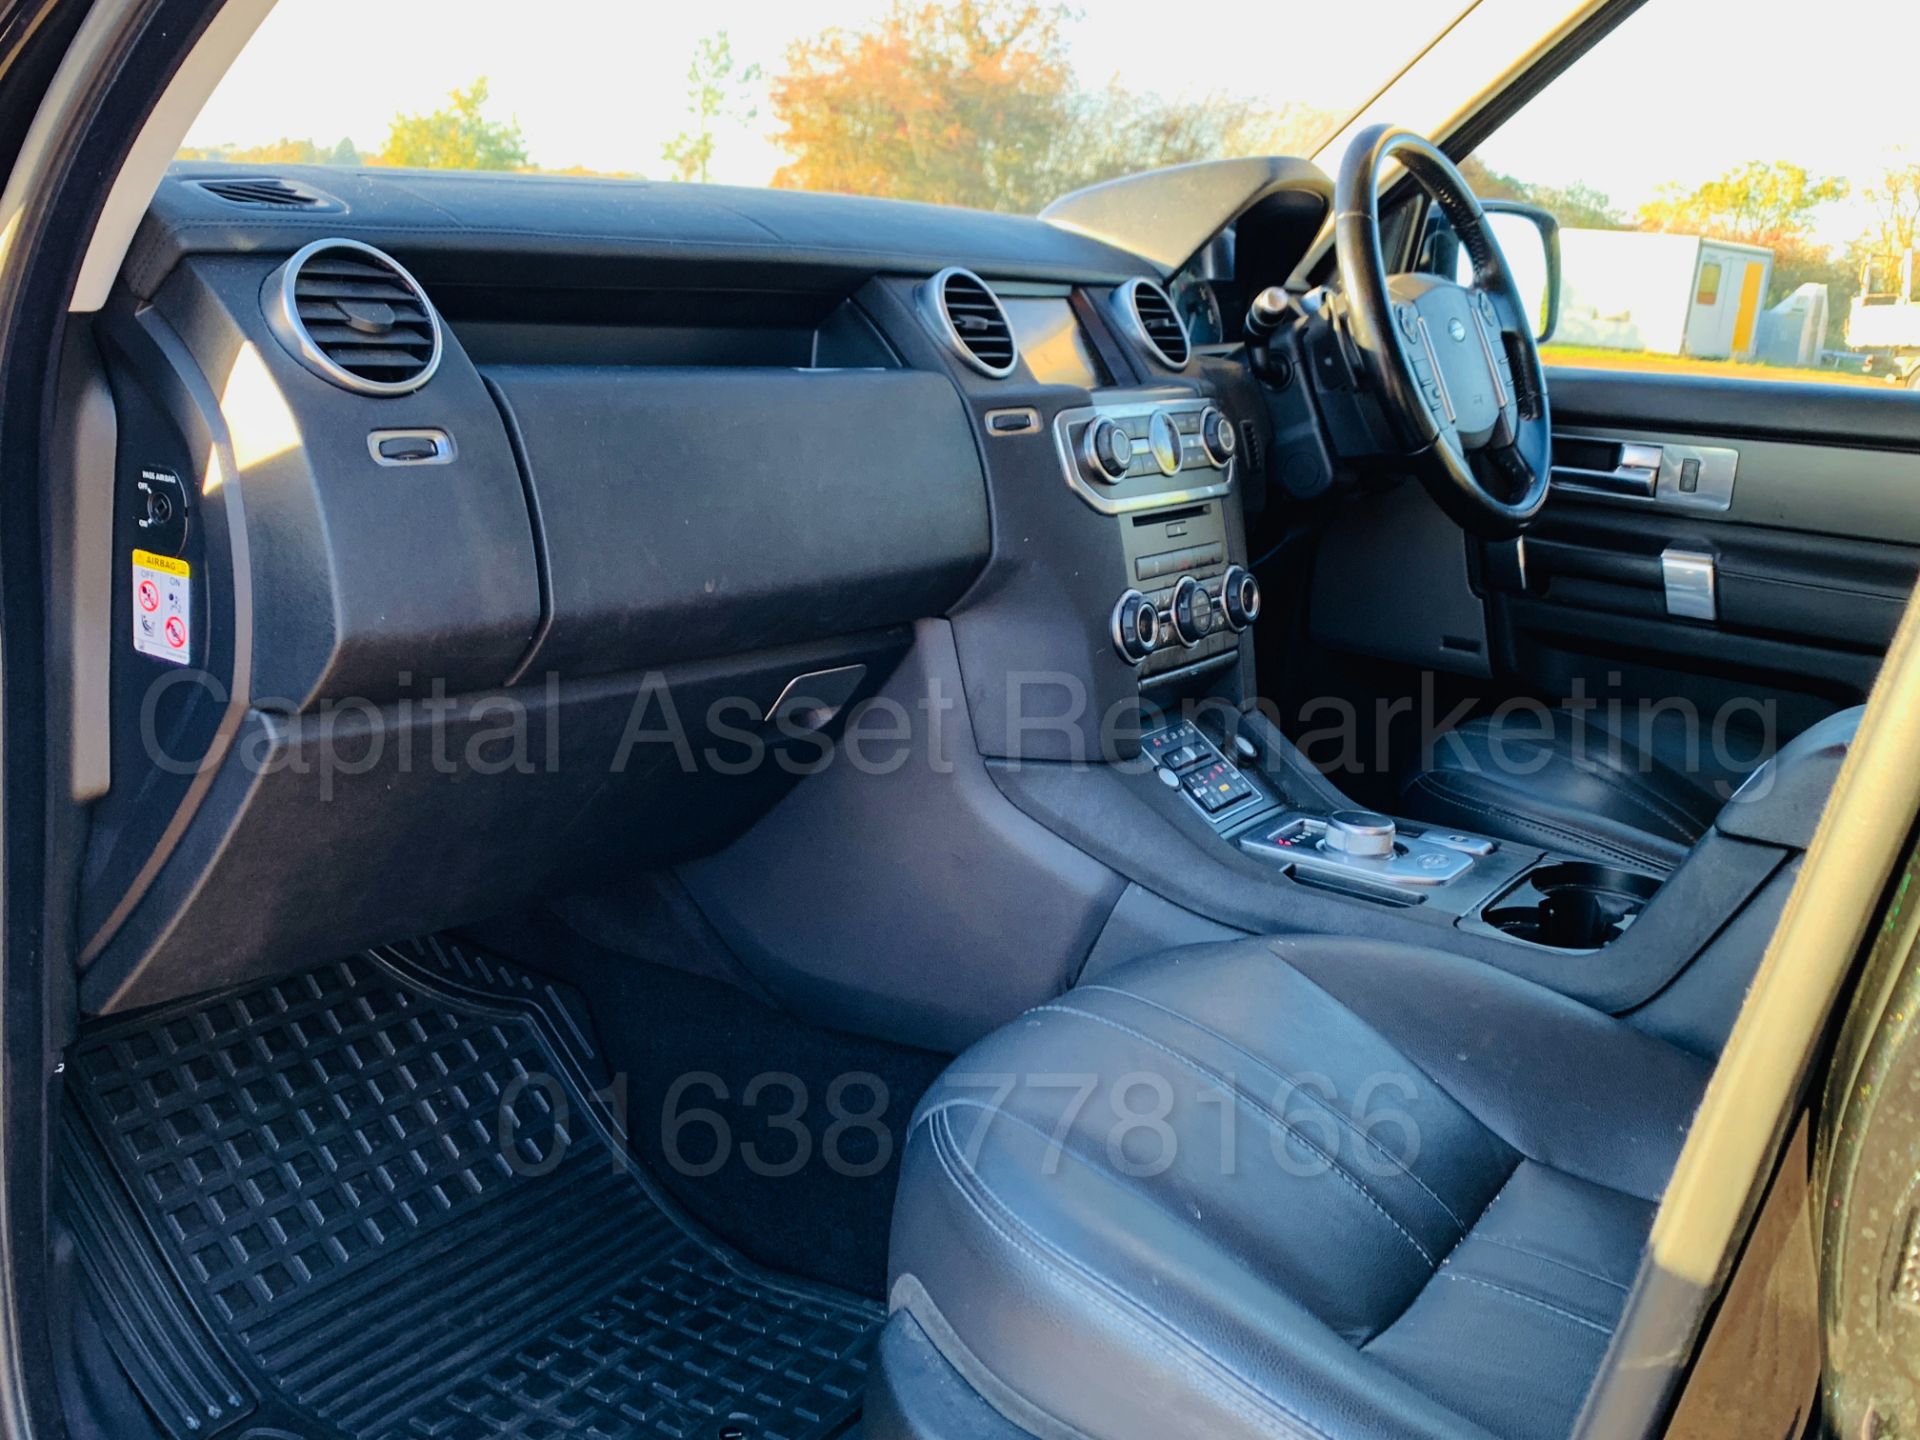 LAND ROVER DISCOVERY 4 **COMMERCIAL** (2014 MODEL) '3.0 SDV6 - 255 BHP - 8 SPEED AUTO' *HUGE SPEC* - Image 21 of 47